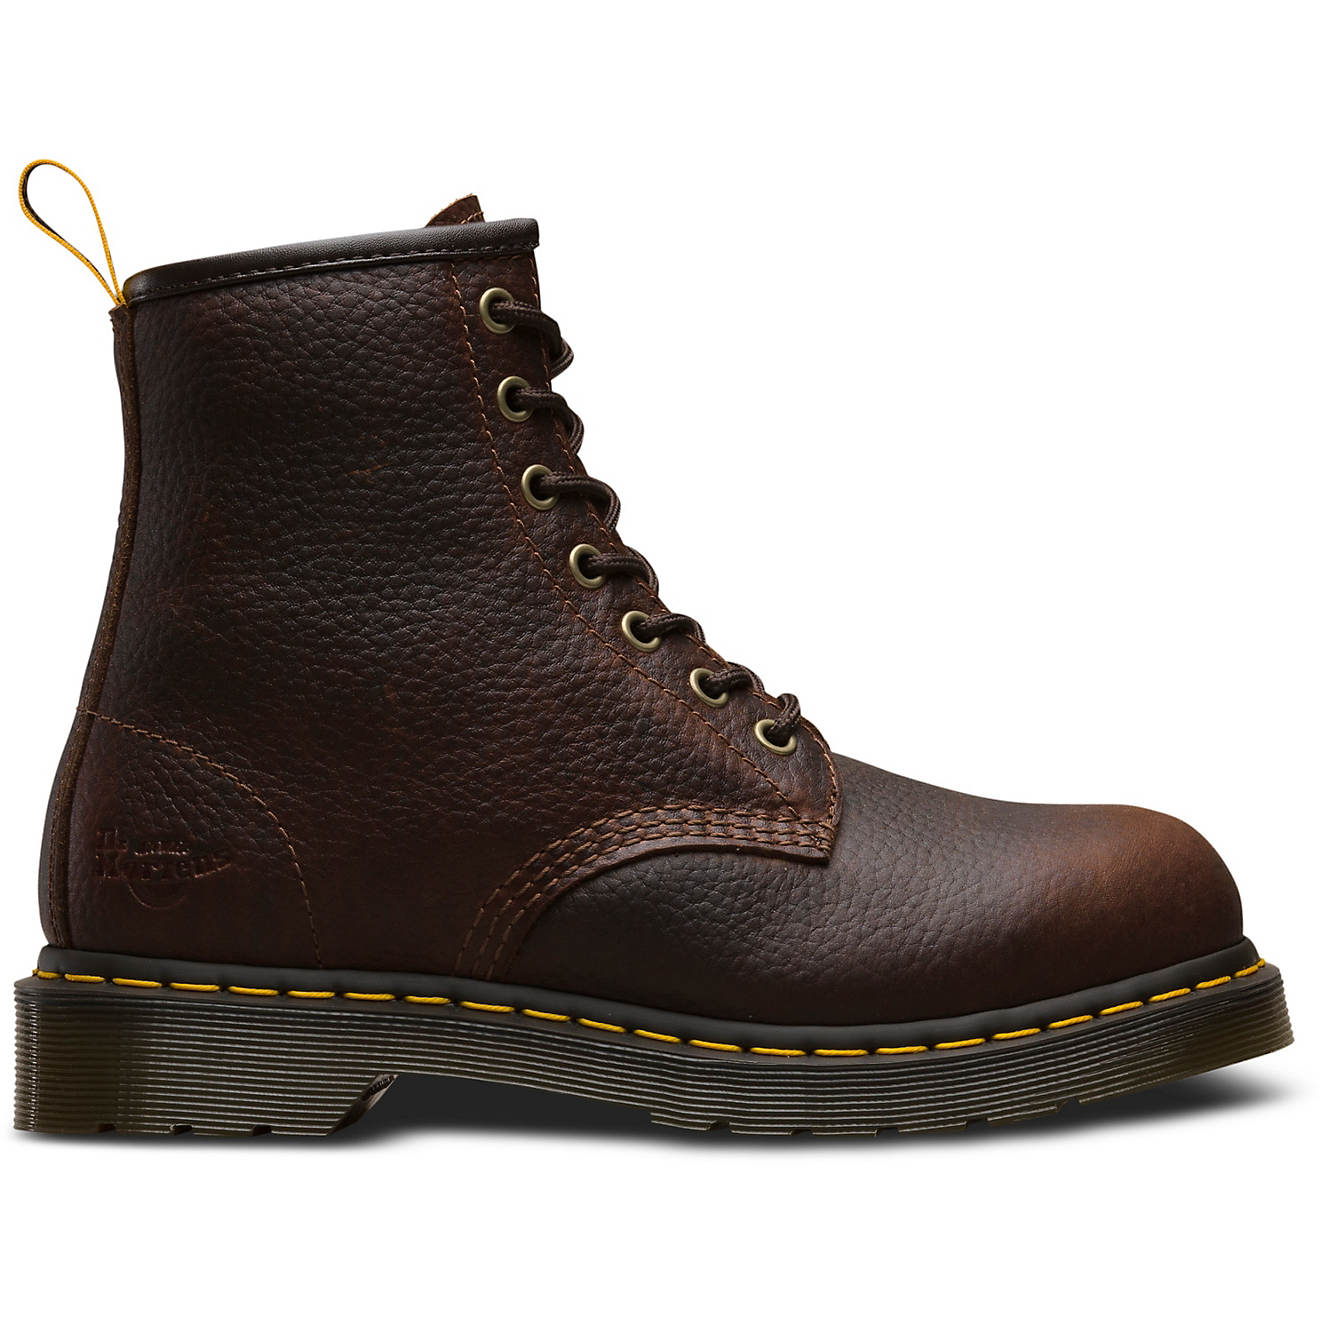 Dr. Martens Women's Maple EH Steel Toe Lace Up Work Boots | Academy